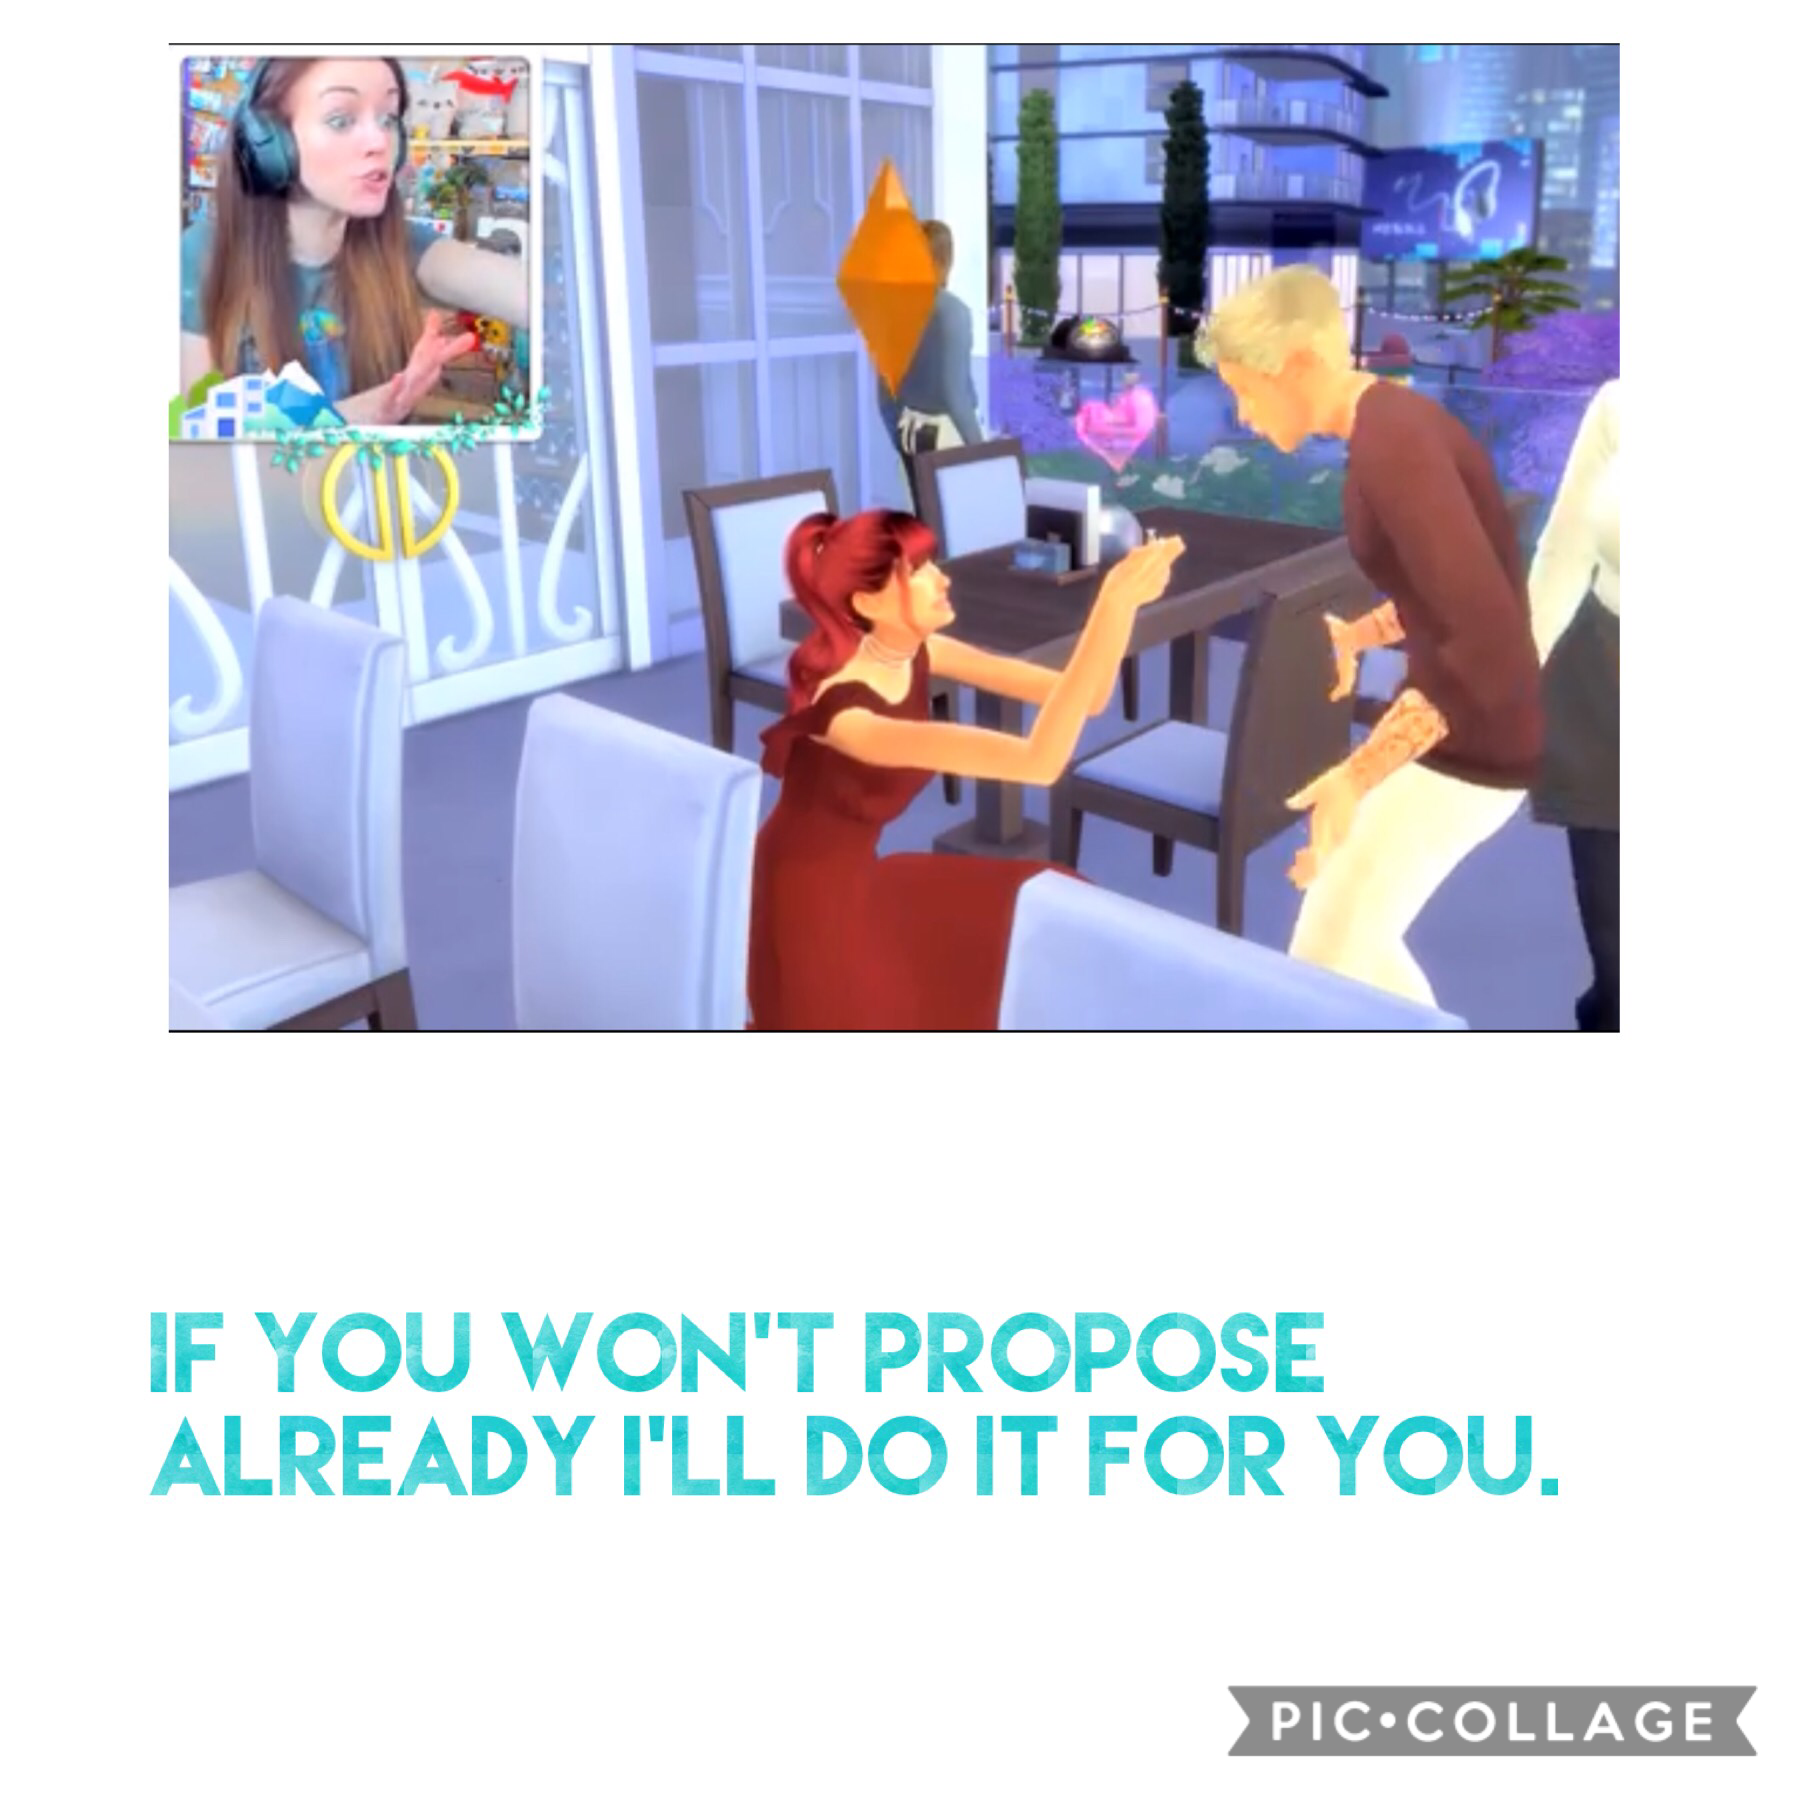 In Sims 4